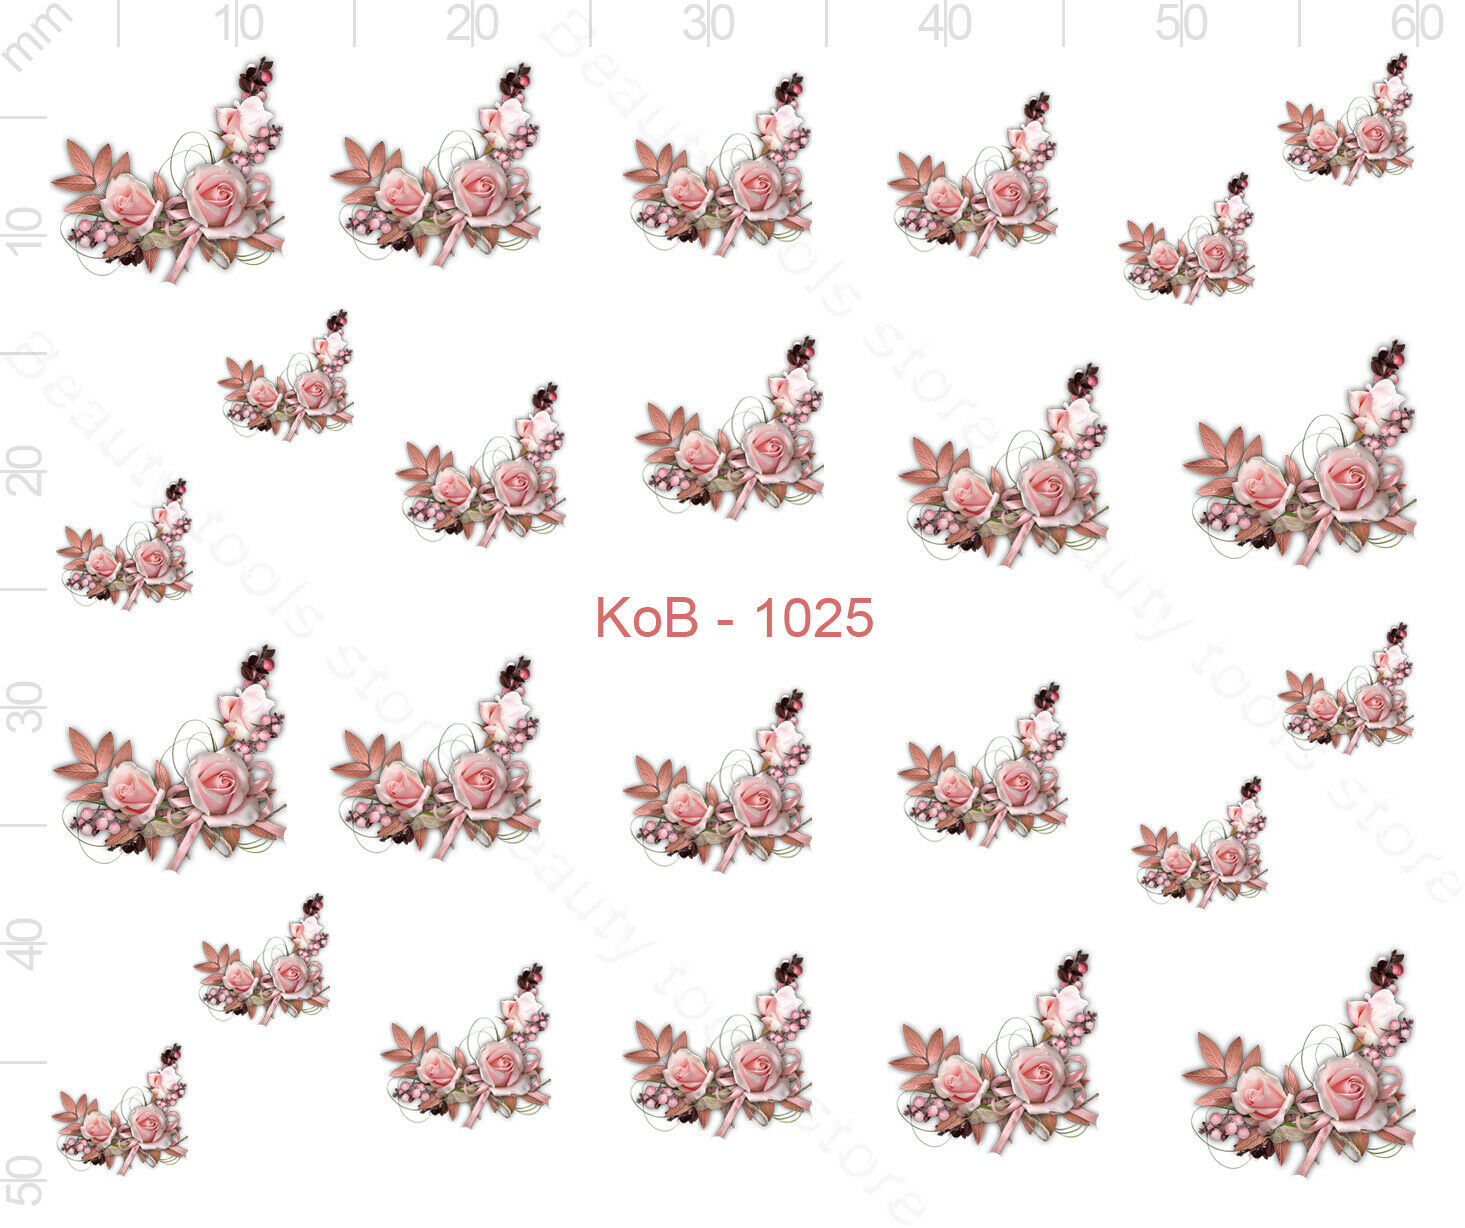 Nail Art Water Transfer Stickers Decal Pretty Pink Roses Flowers KoB-1025